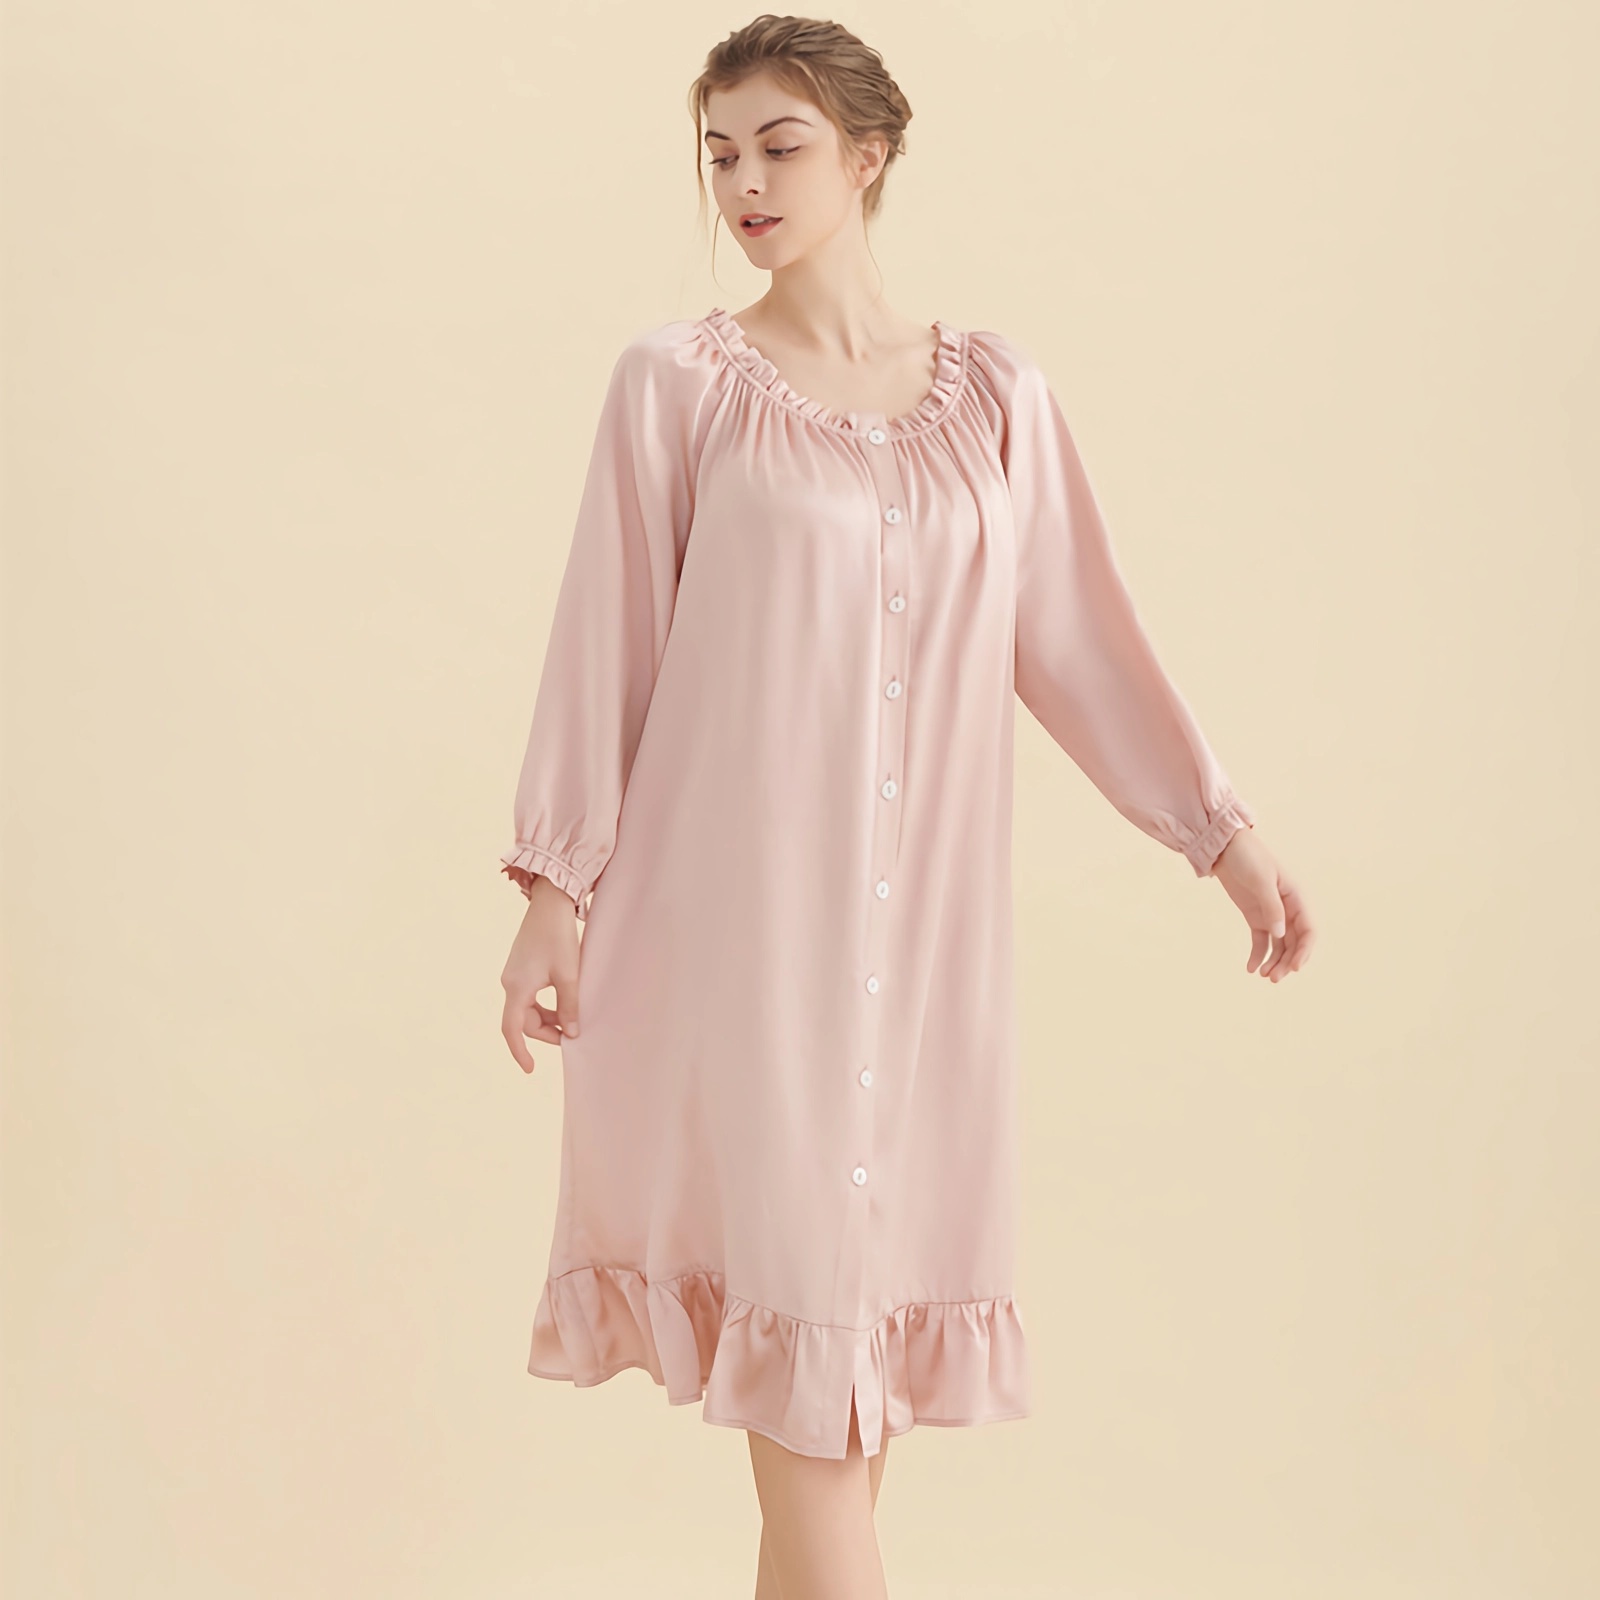 Silk Nightgowns For Women Luxury REAL SILK LIFE